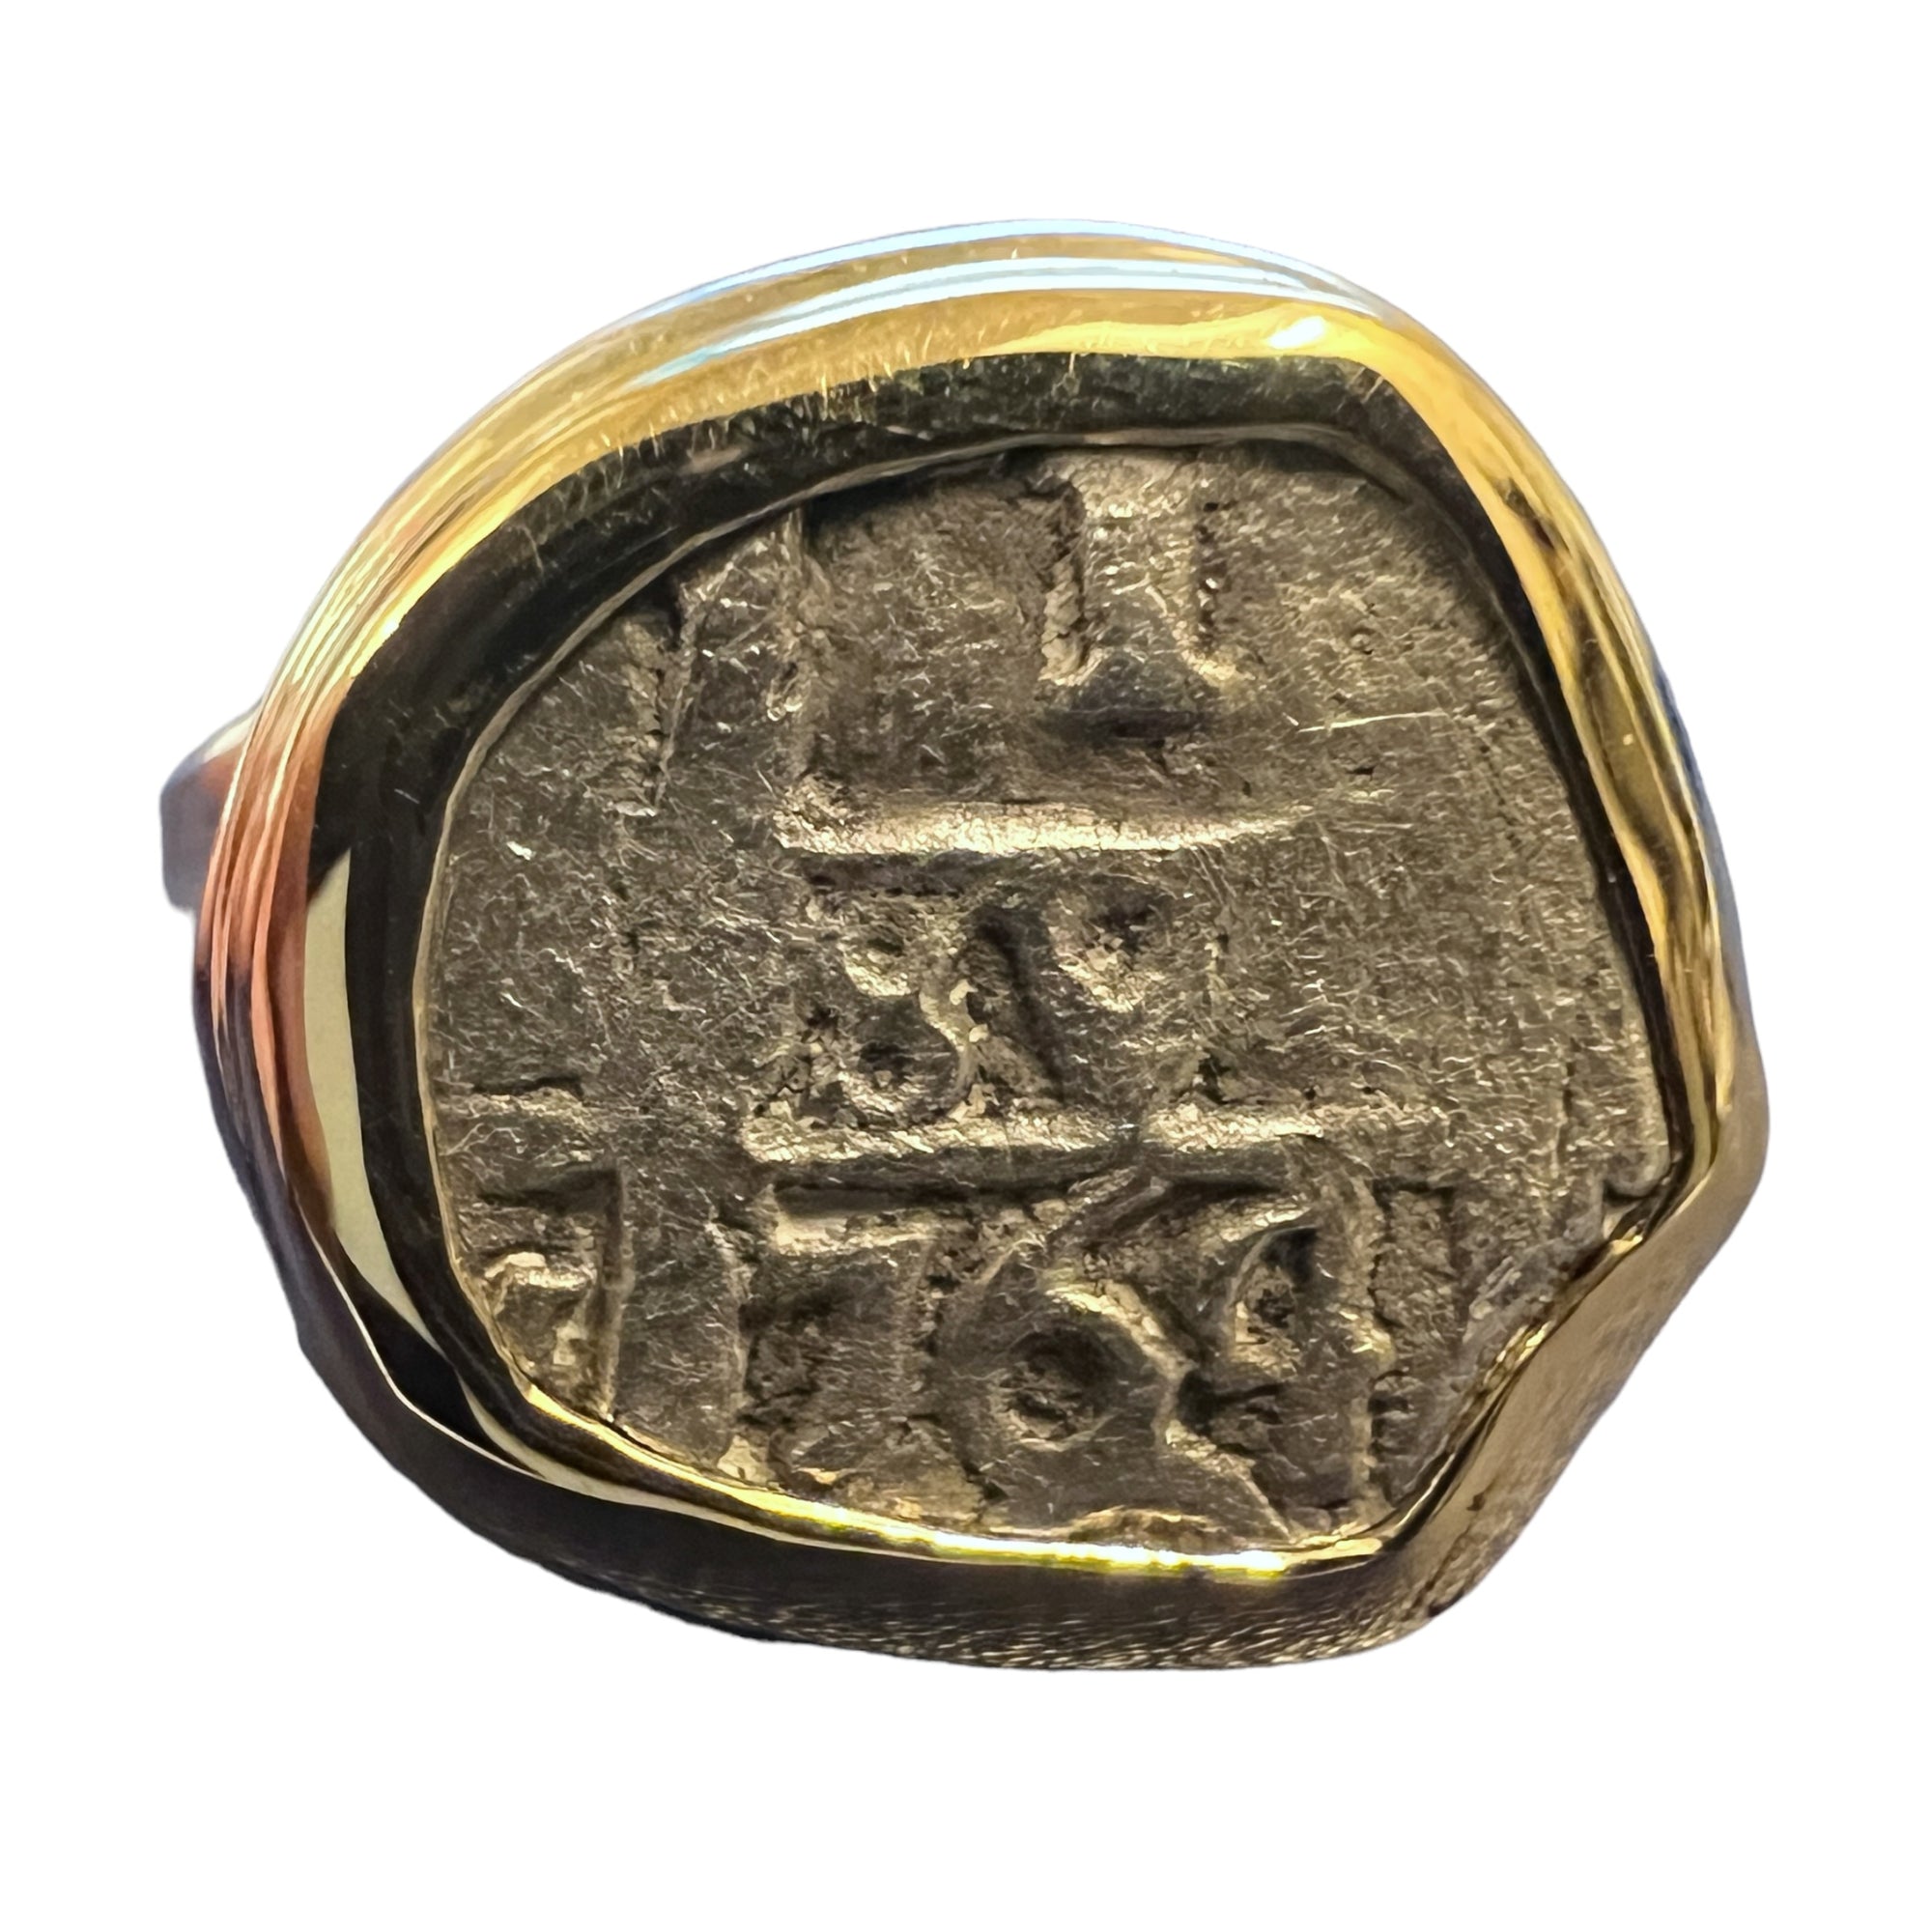 Spanish Cob - 1 Reales - Dated 1764 - Presented in Sterling Ring with 14K gold frame